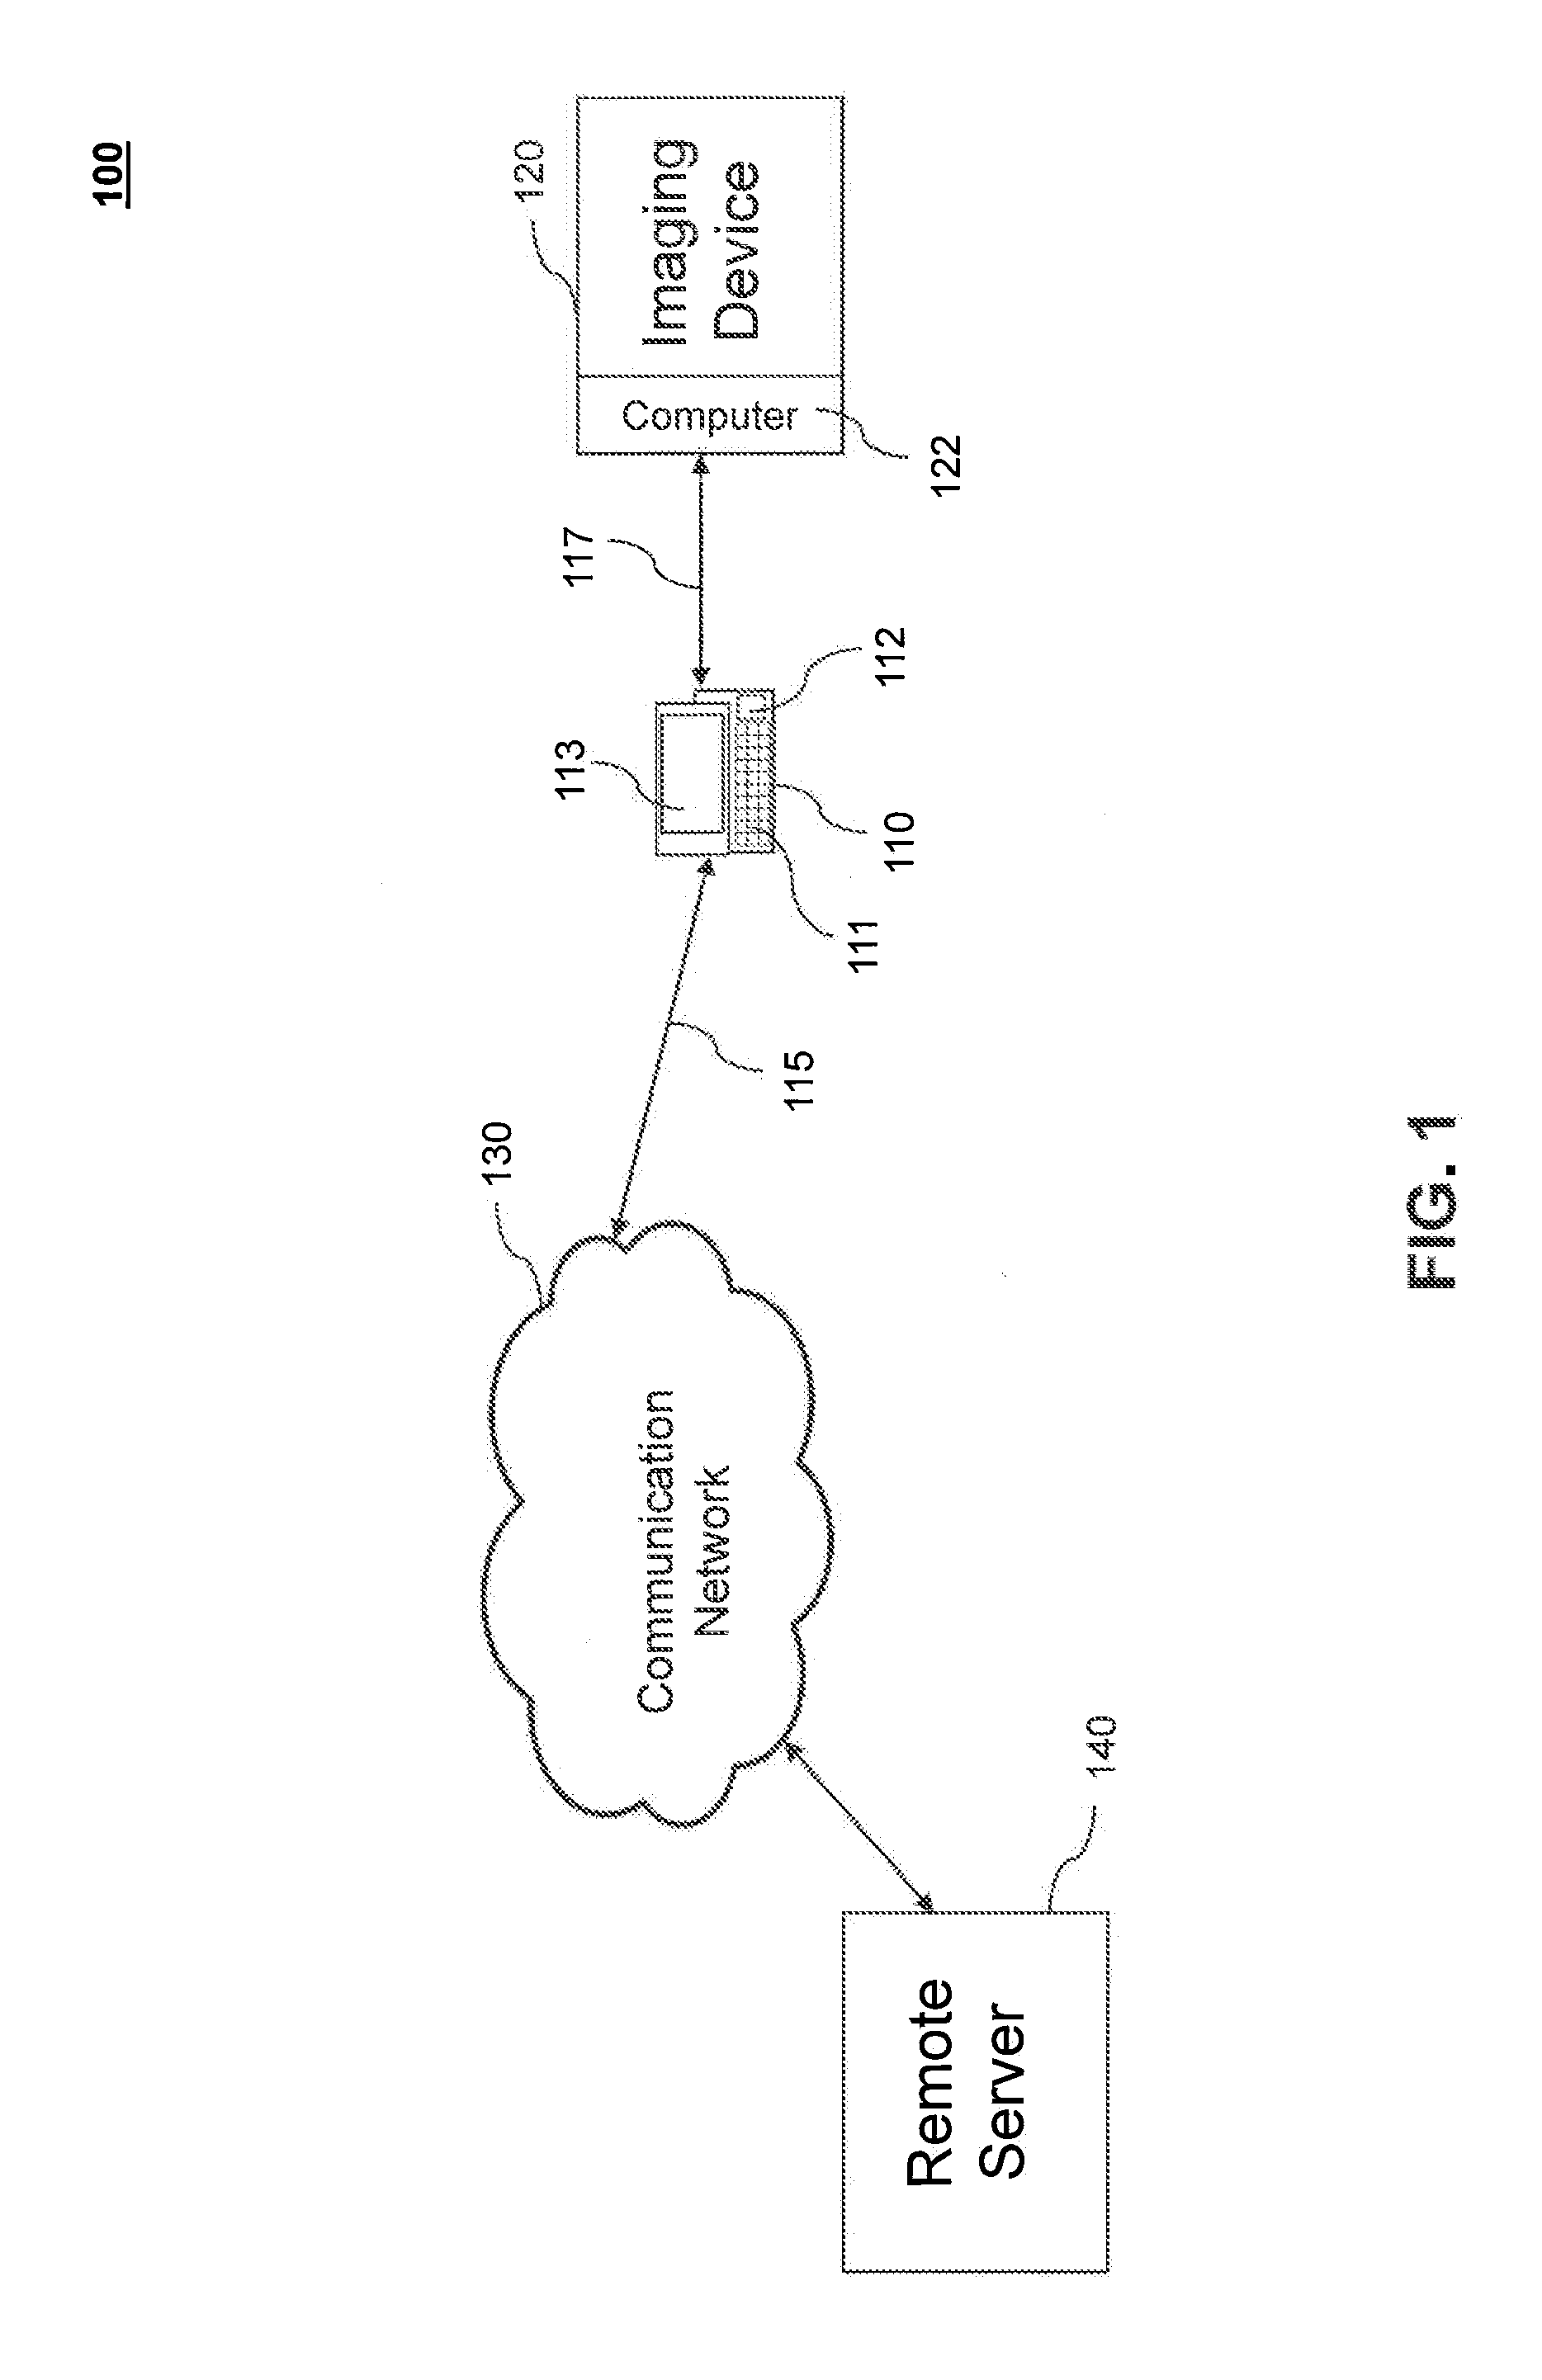 Portable Imaging System with a Mobile Device as Input and Output Mechanism